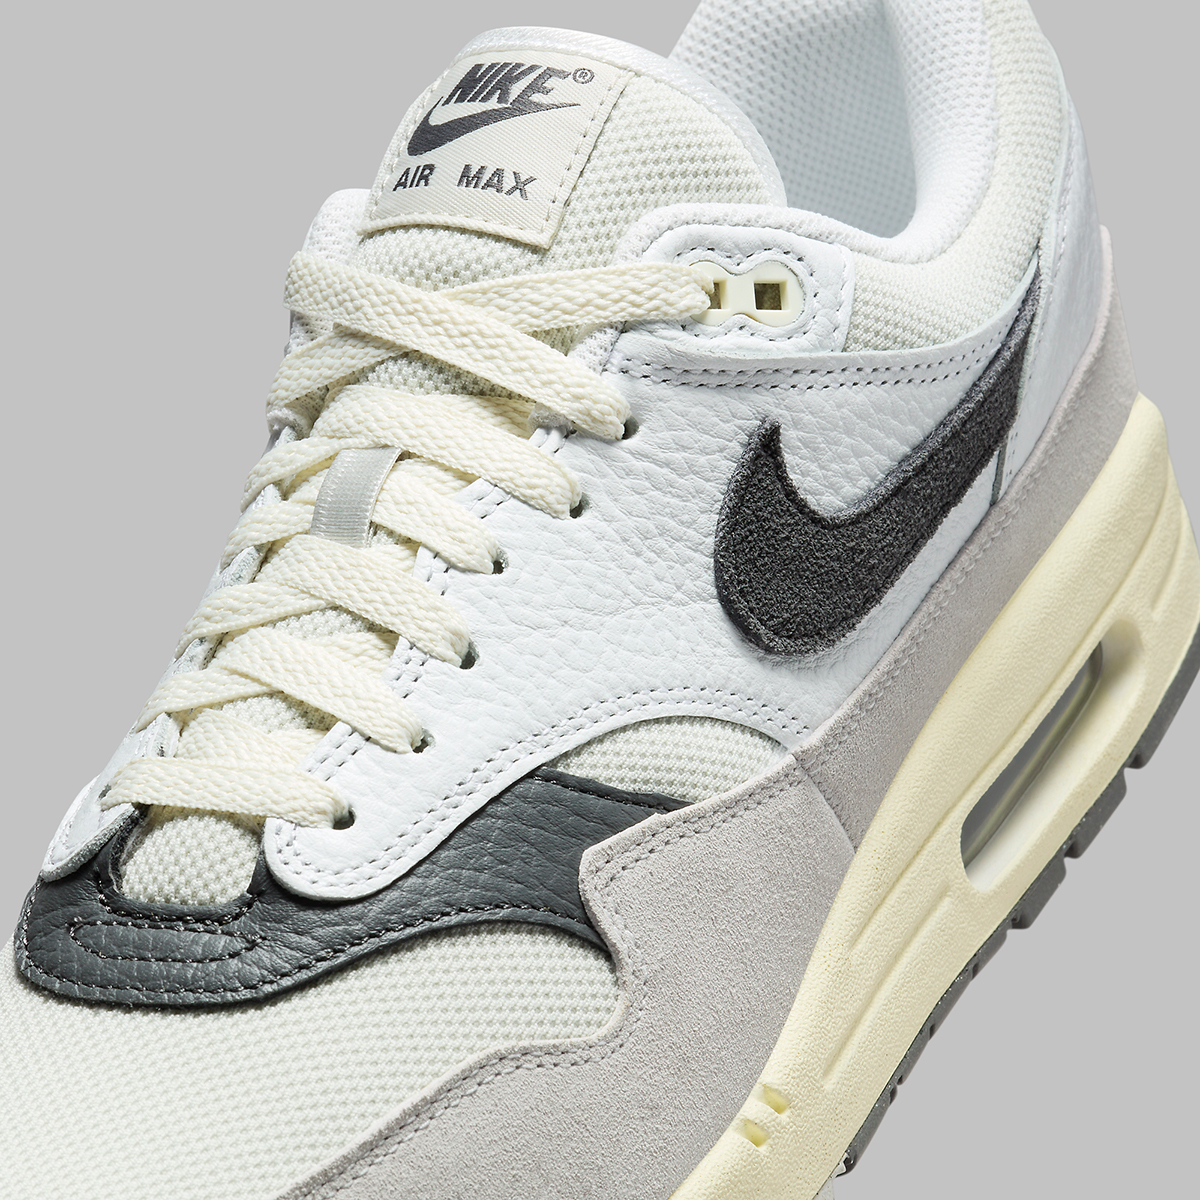 nike air max turquoise ombre hair color curly hair Bone Iron Grey Cashmere Hf3498 007 1